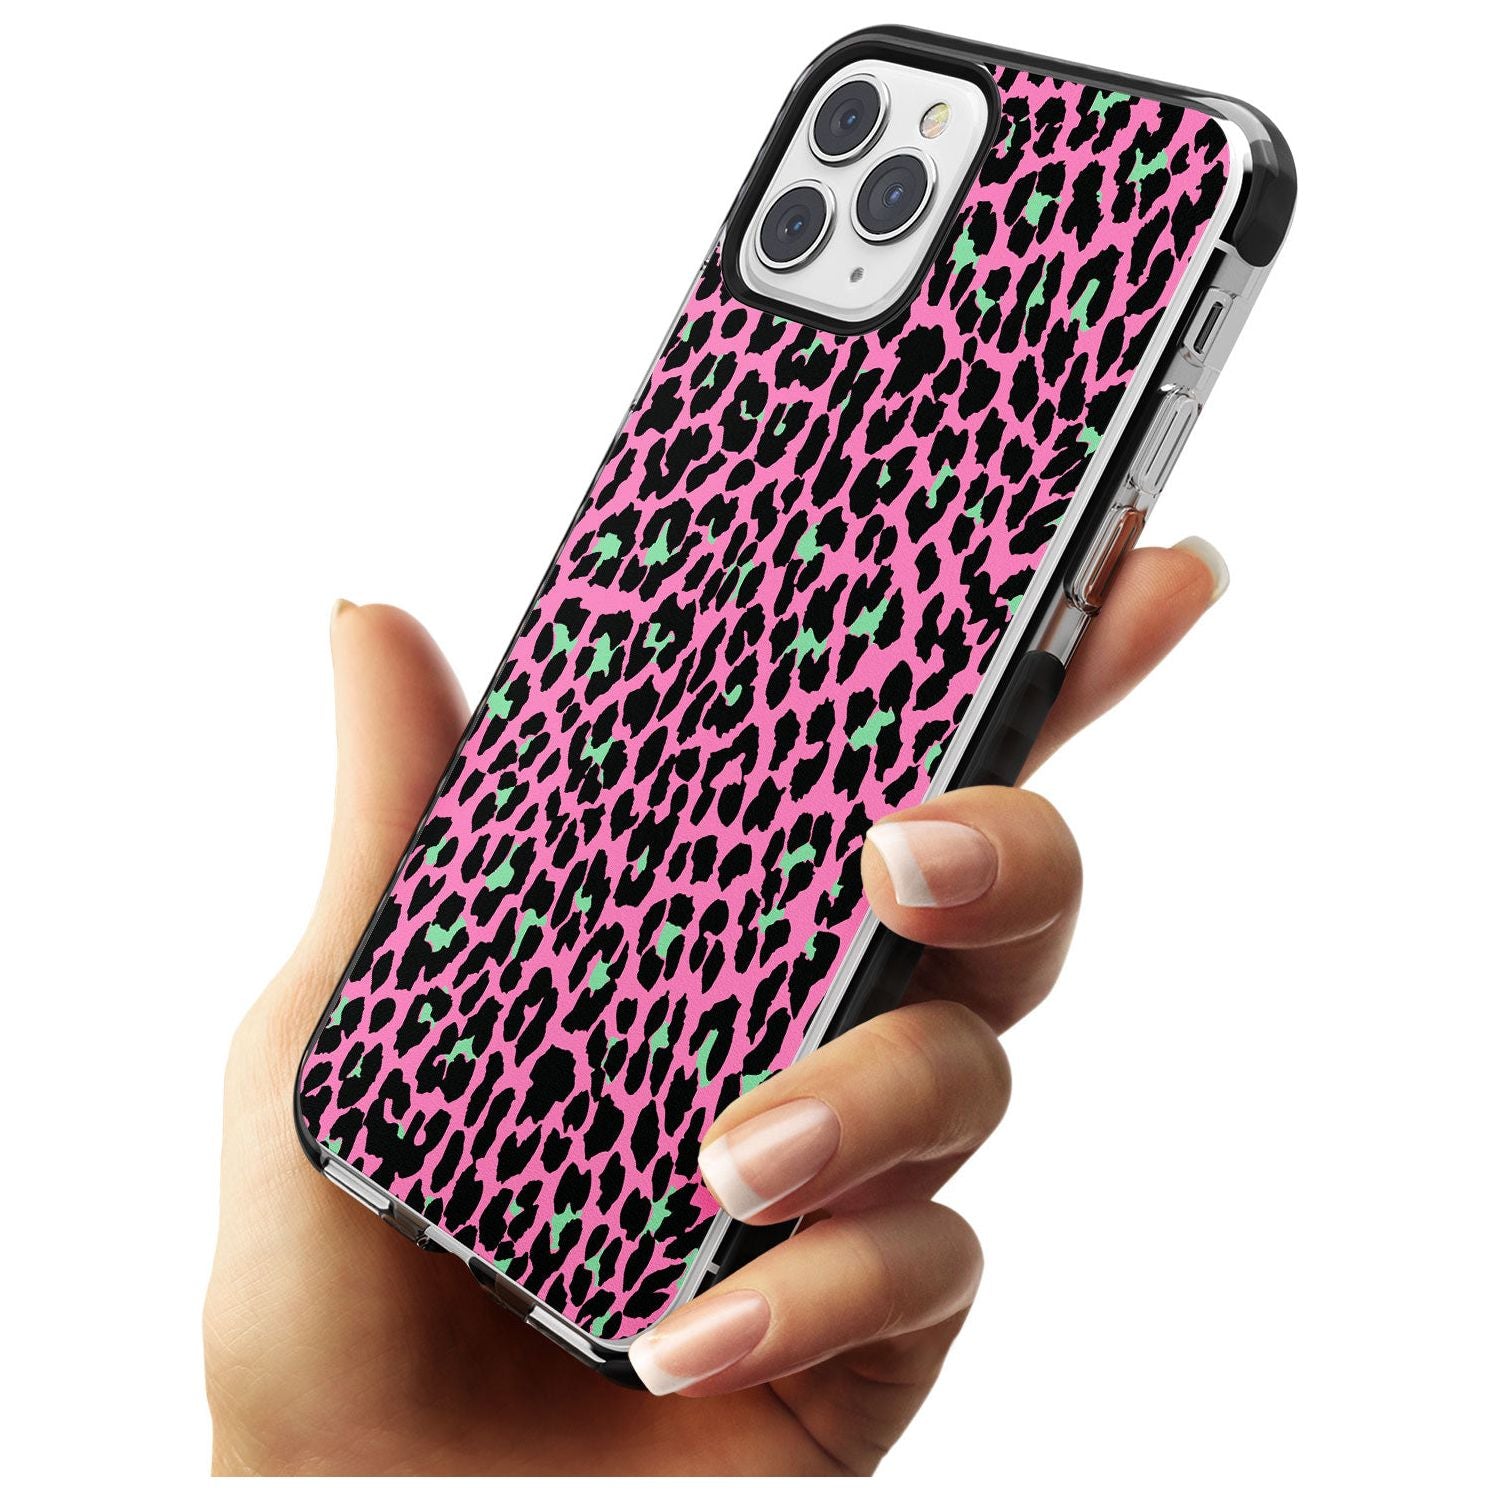 Green on Pink Leopard Print Pattern Black Impact Phone Case for iPhone 11 Pro Max